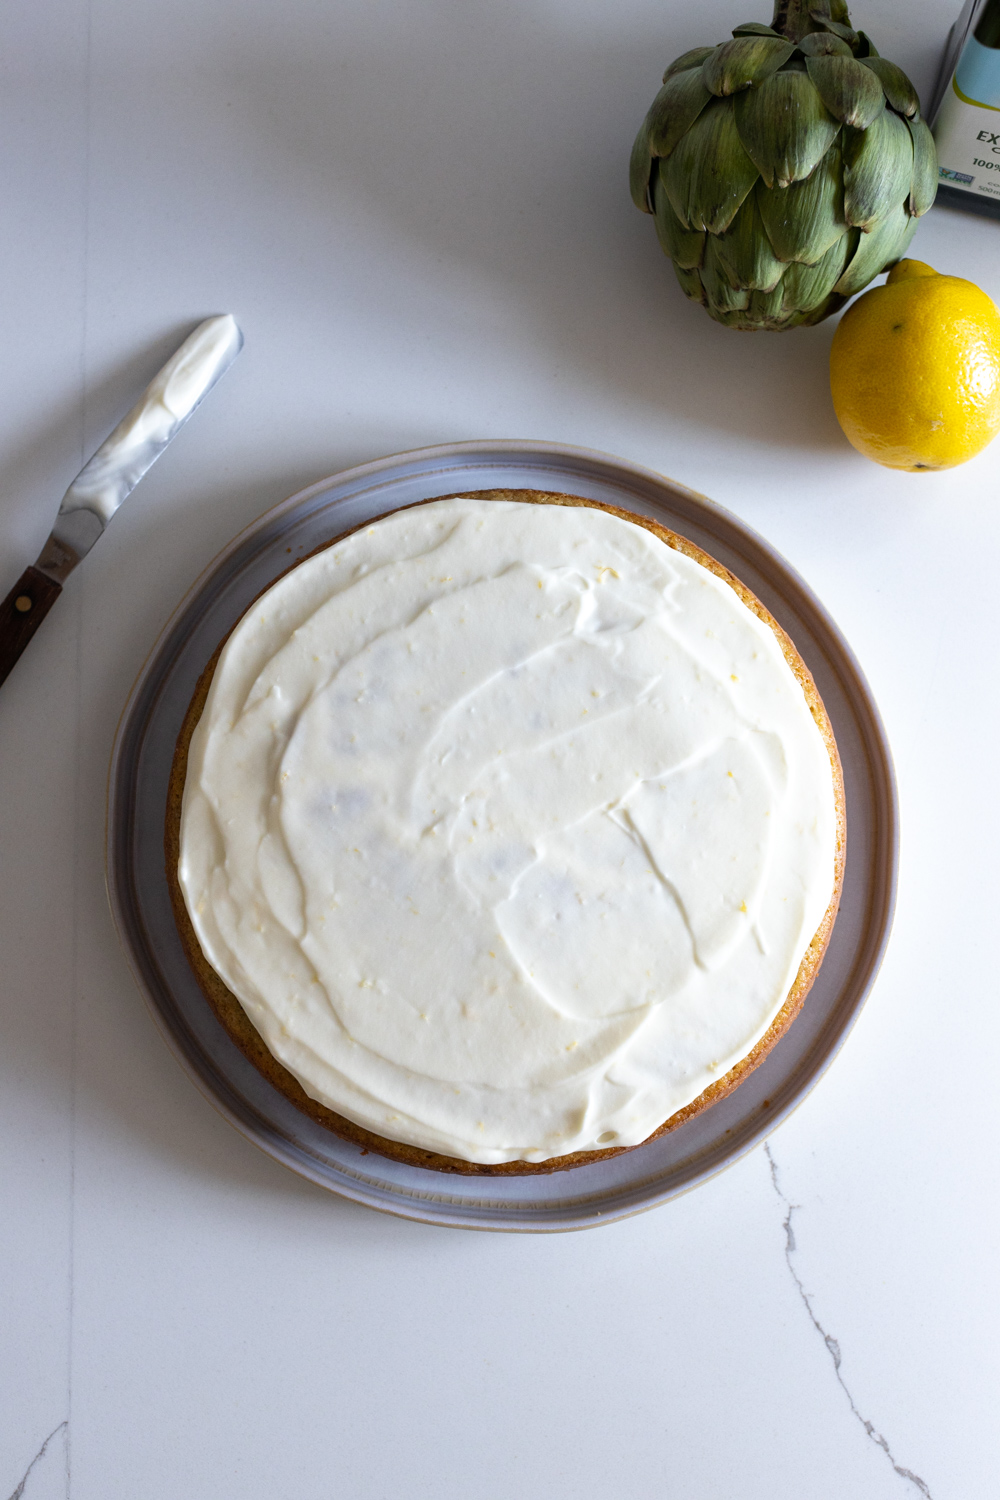 Frosting the Artichoke Olive Oil Cake with Lemon Cream Cheese Frosting